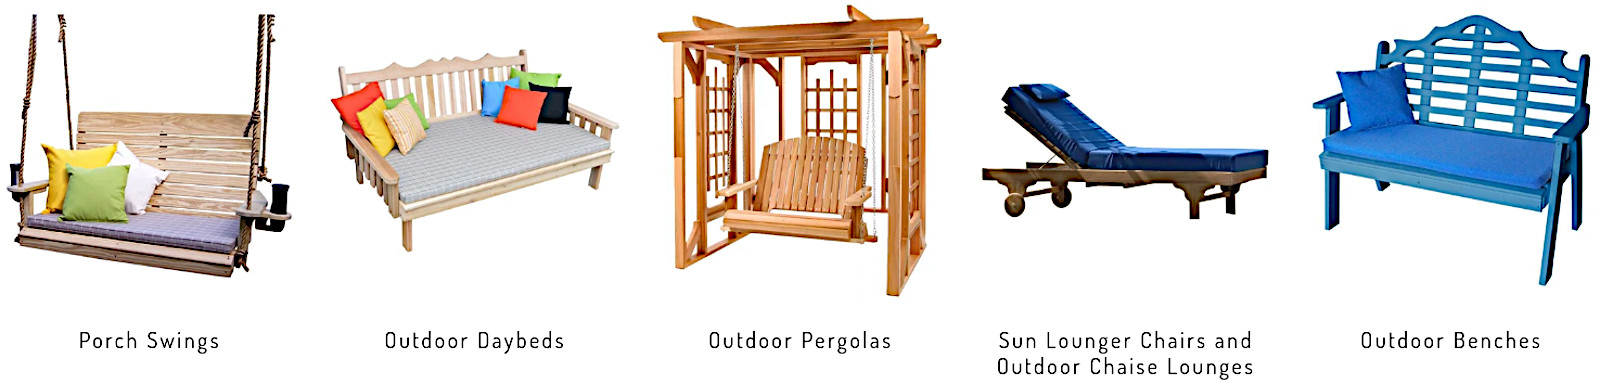 outdoor furniture closeout price